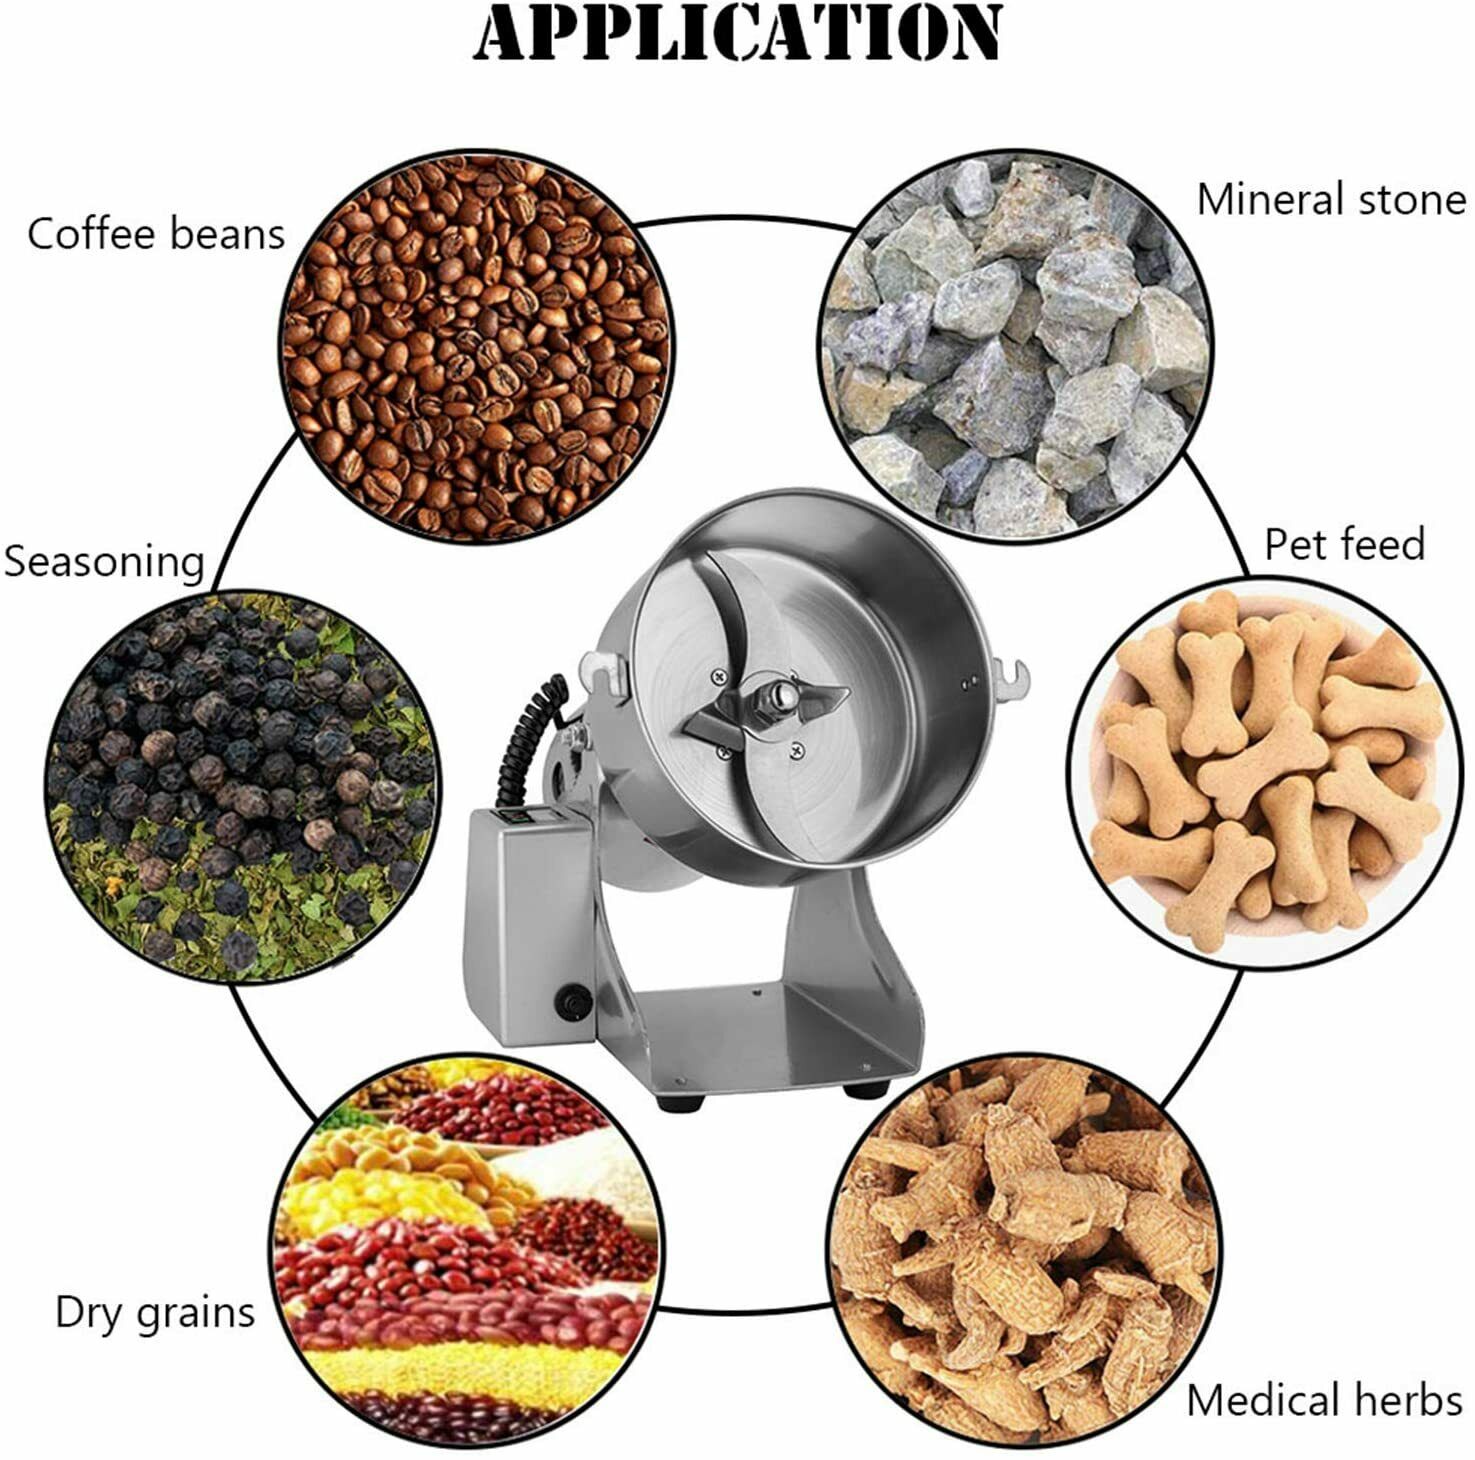 https://econosuperstore.com/wp-content/uploads/imported/1/Electric-Grain-Mills-Grinder-Powder-Pulverize-Herb-Spice-Pepper-Coffee-Coffee-203303039951-5.jpg